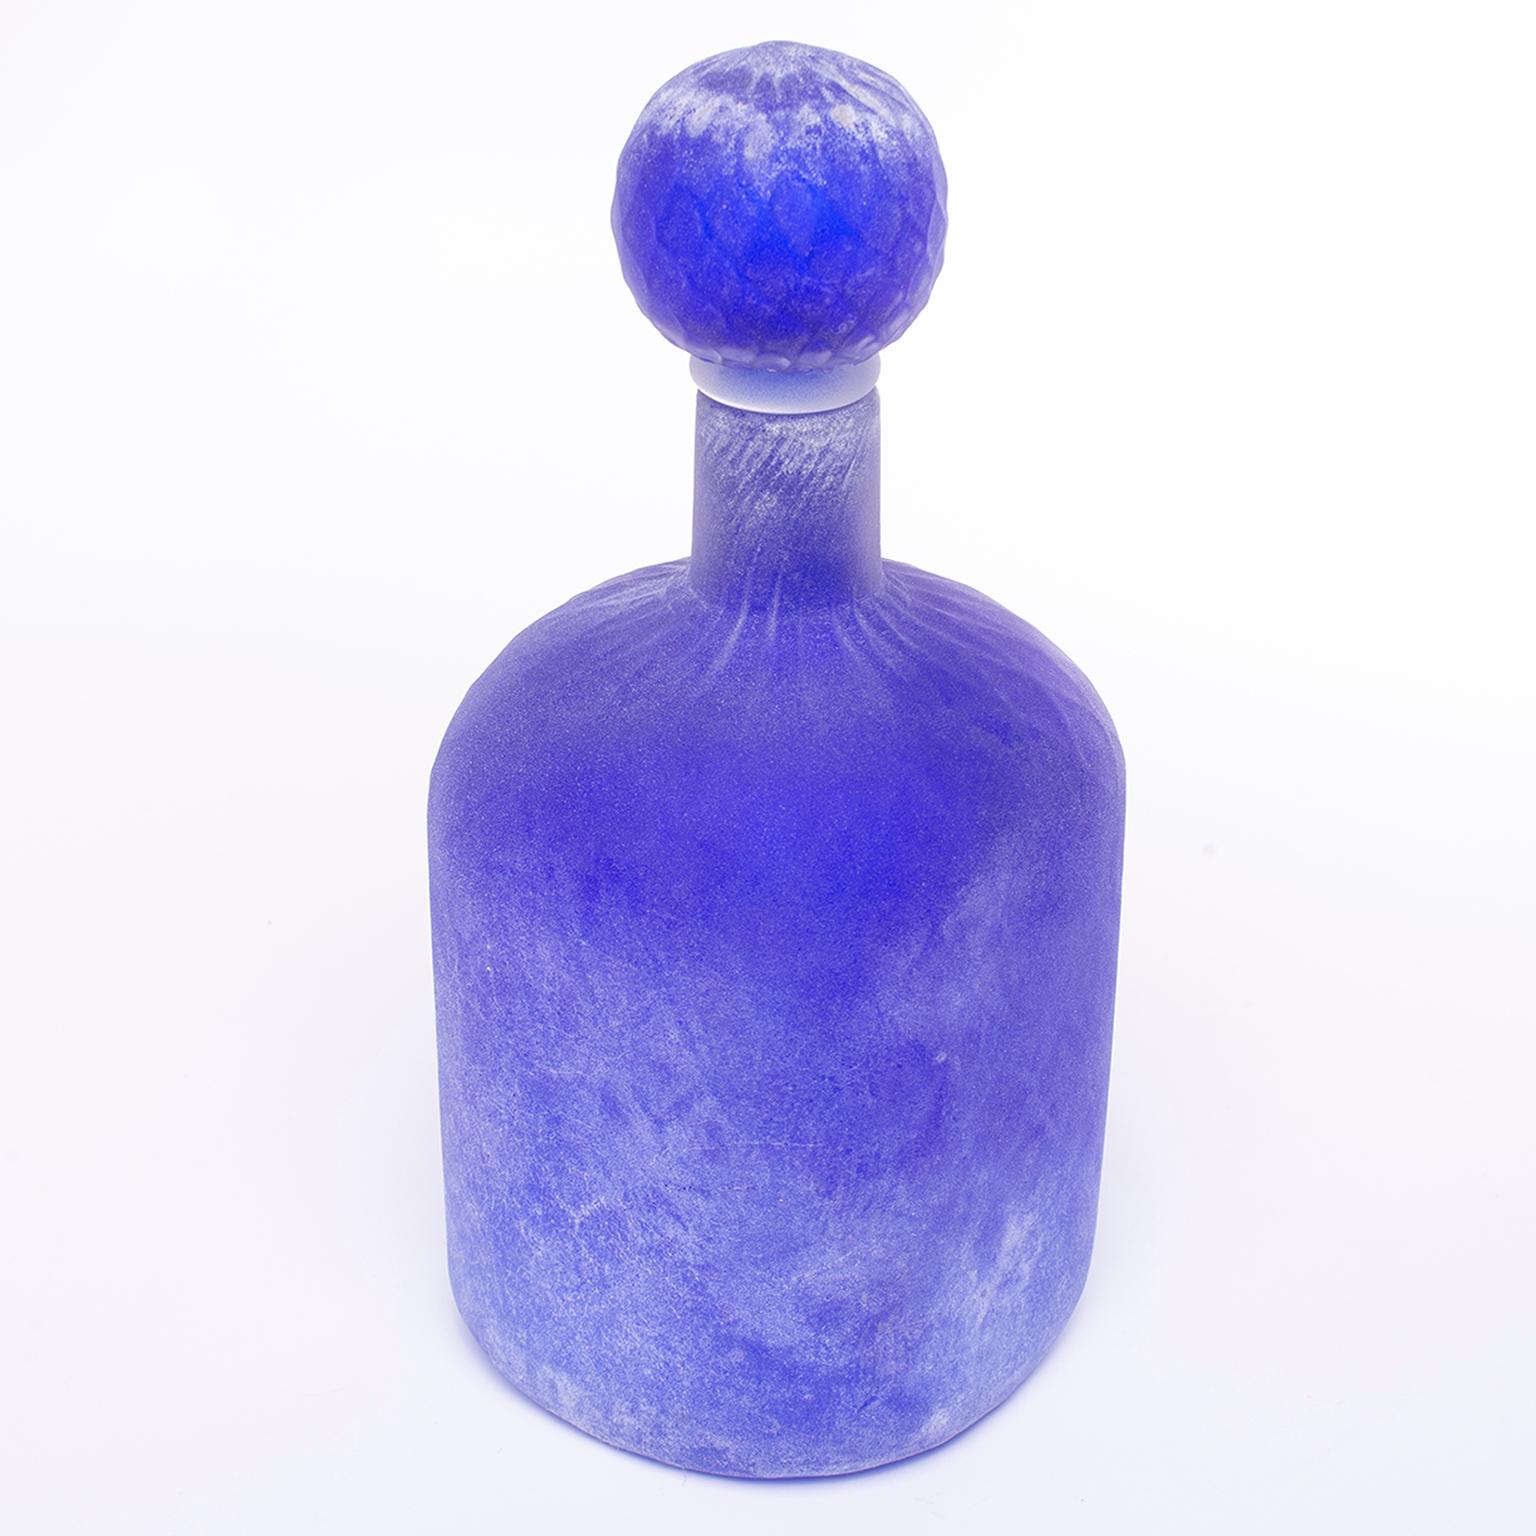 Blue Scavo style Murano glass bottle and stopper by Cenedese, circa 1970s. Original label still affixed. Excellent vintage condition with no flaws found.